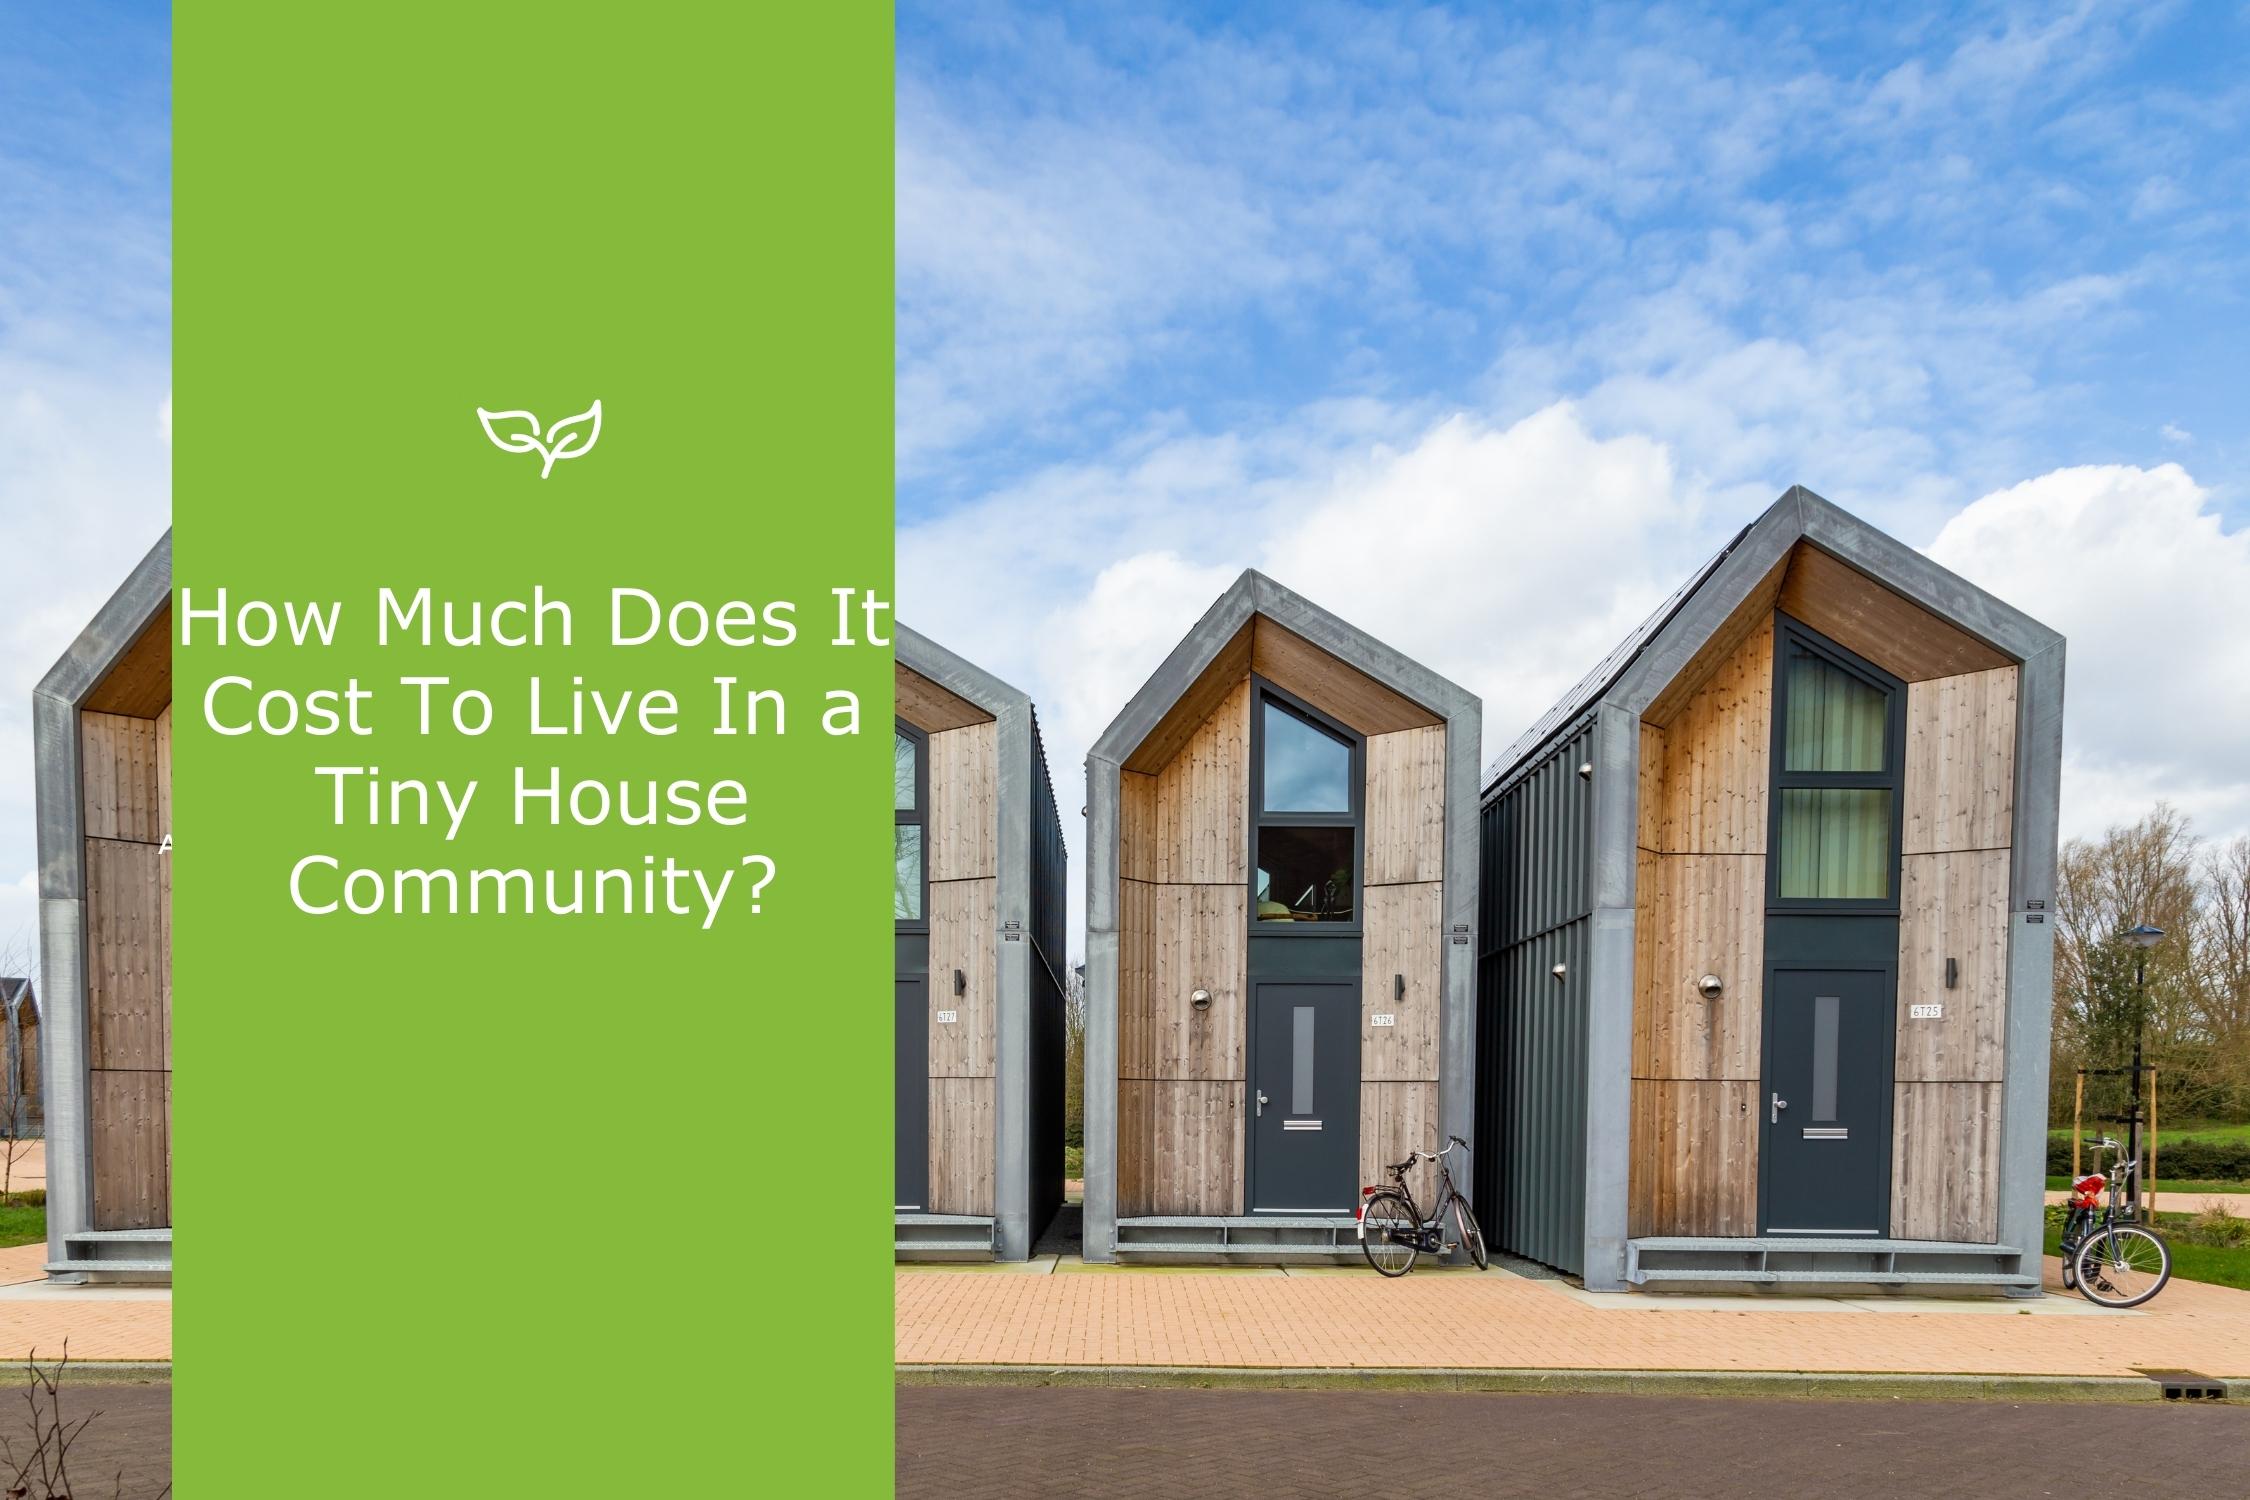 How Much Does It Cost To Live In A Tiny House Community?